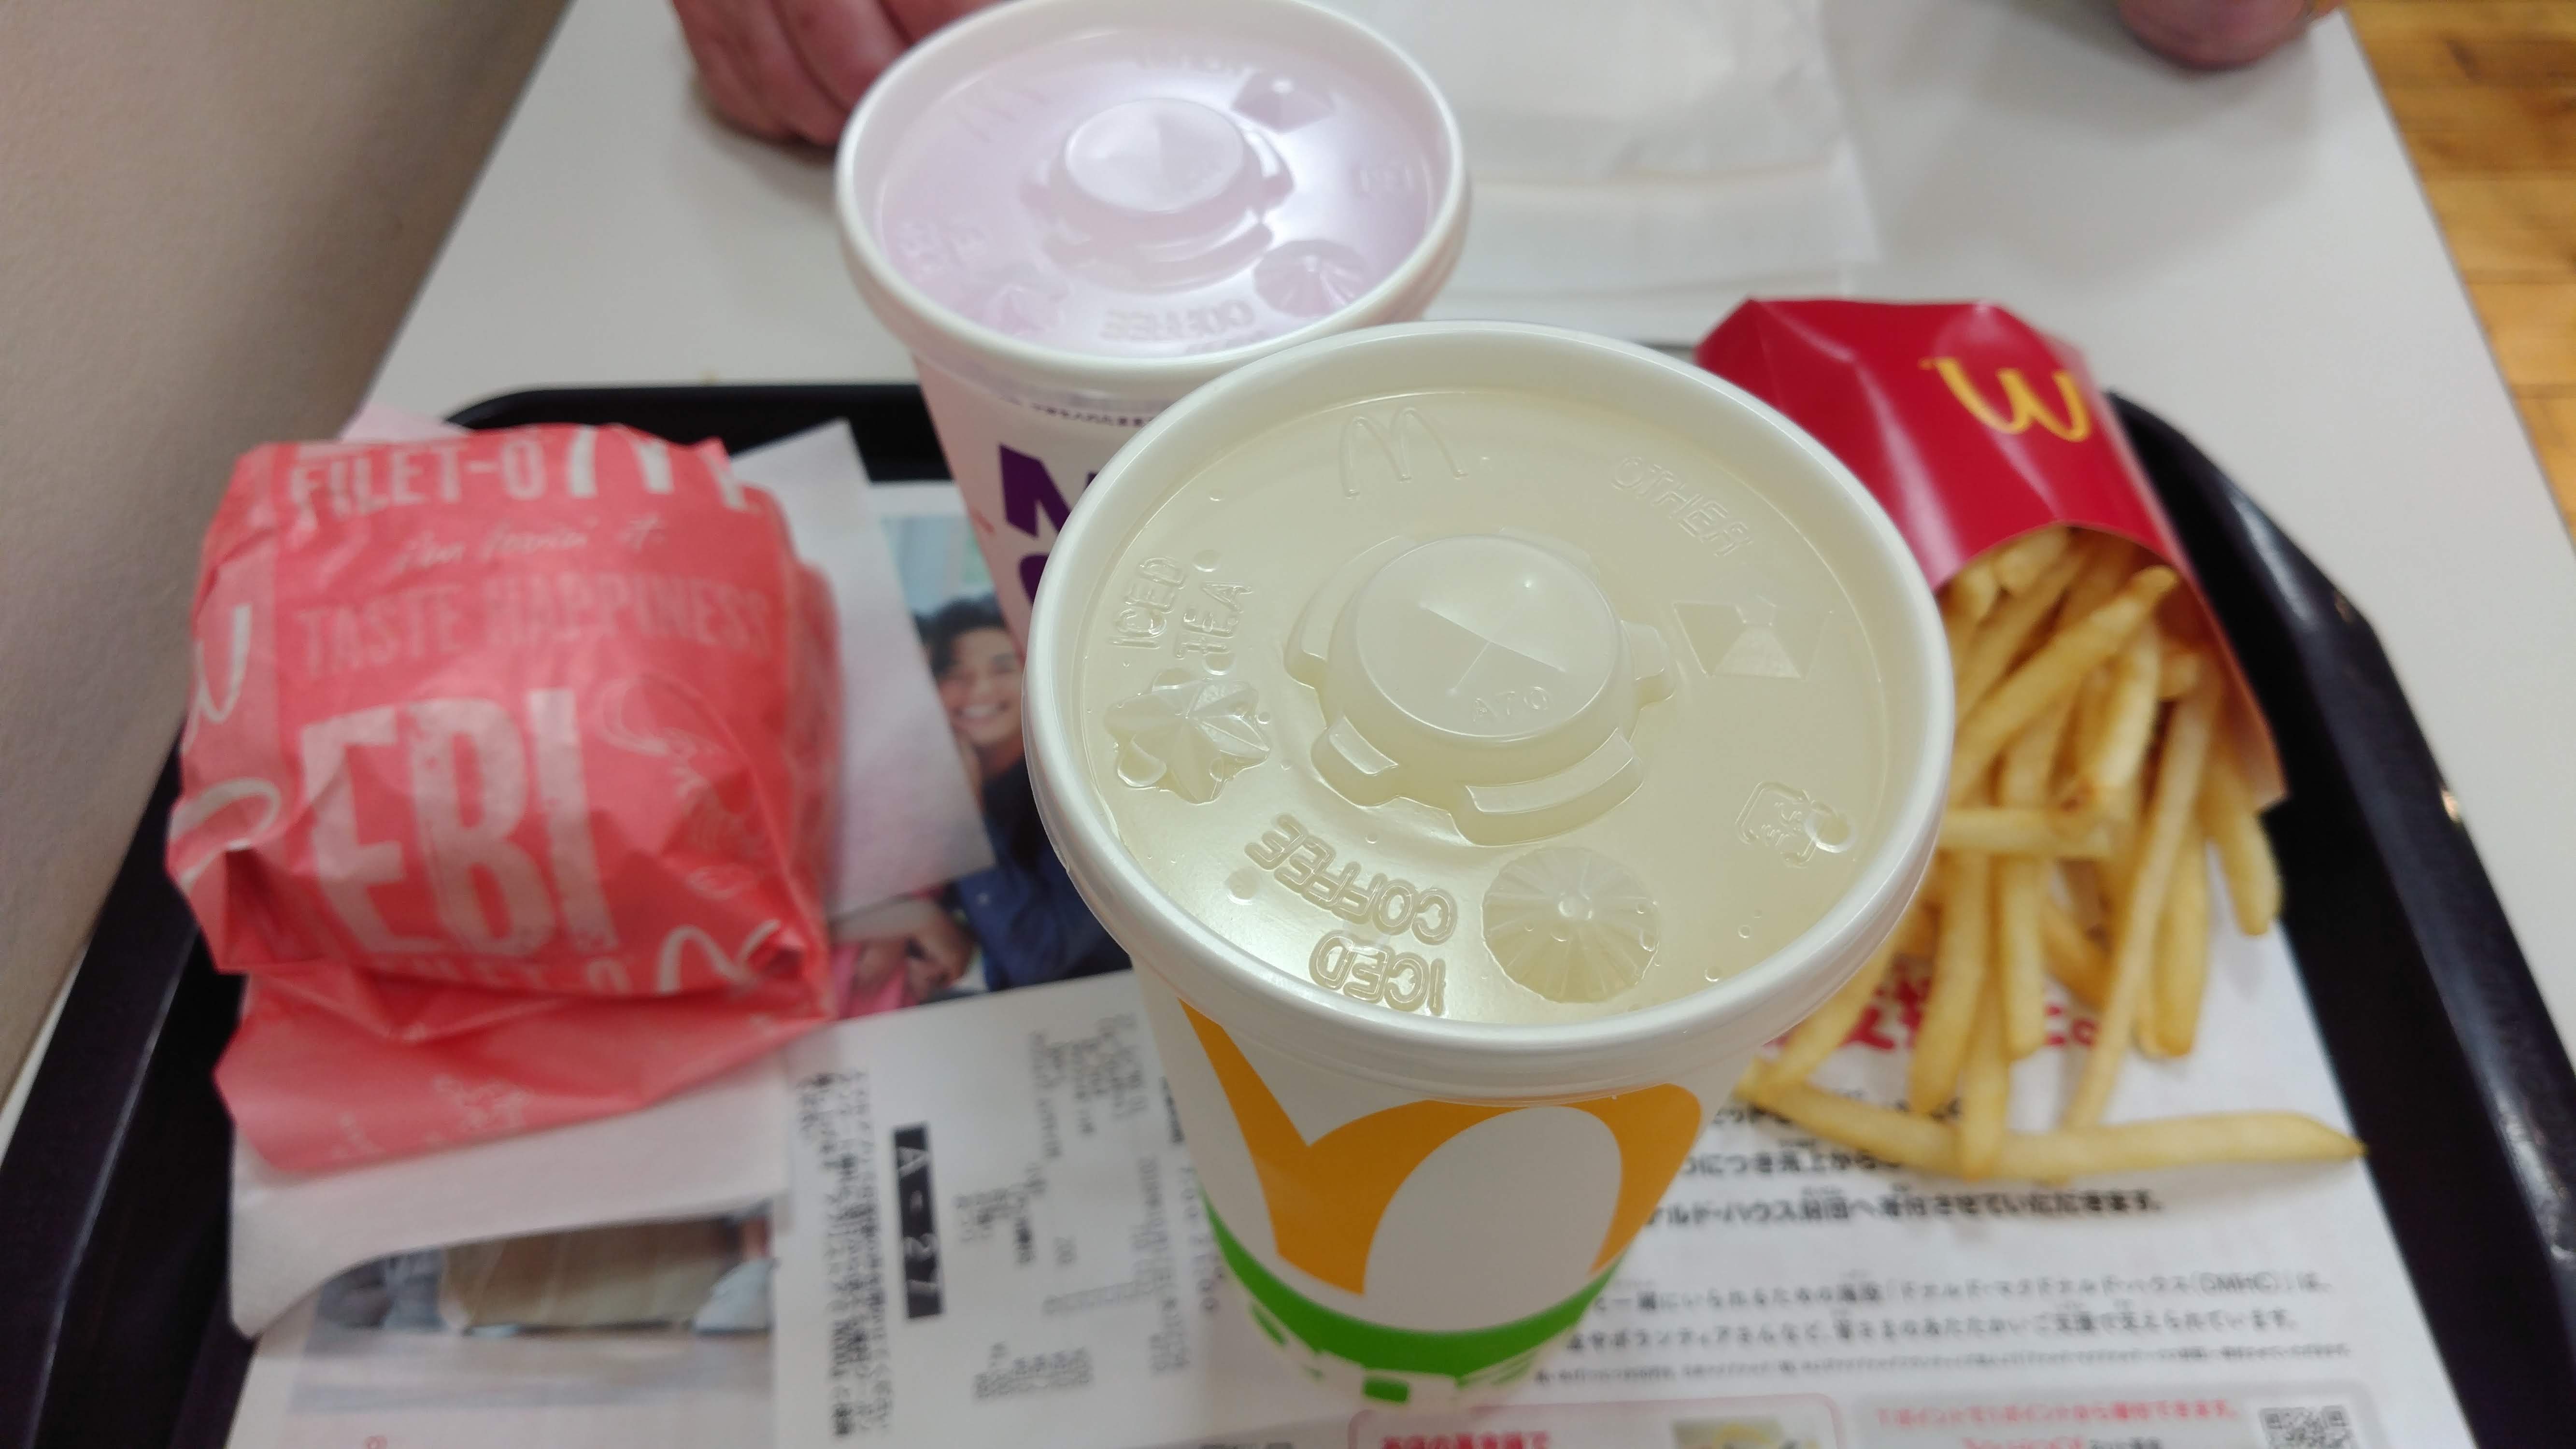 a tray of McDonald's food items  the word Ebi is visible on a sandwich wrapper and there are two drinks and an order of french fries